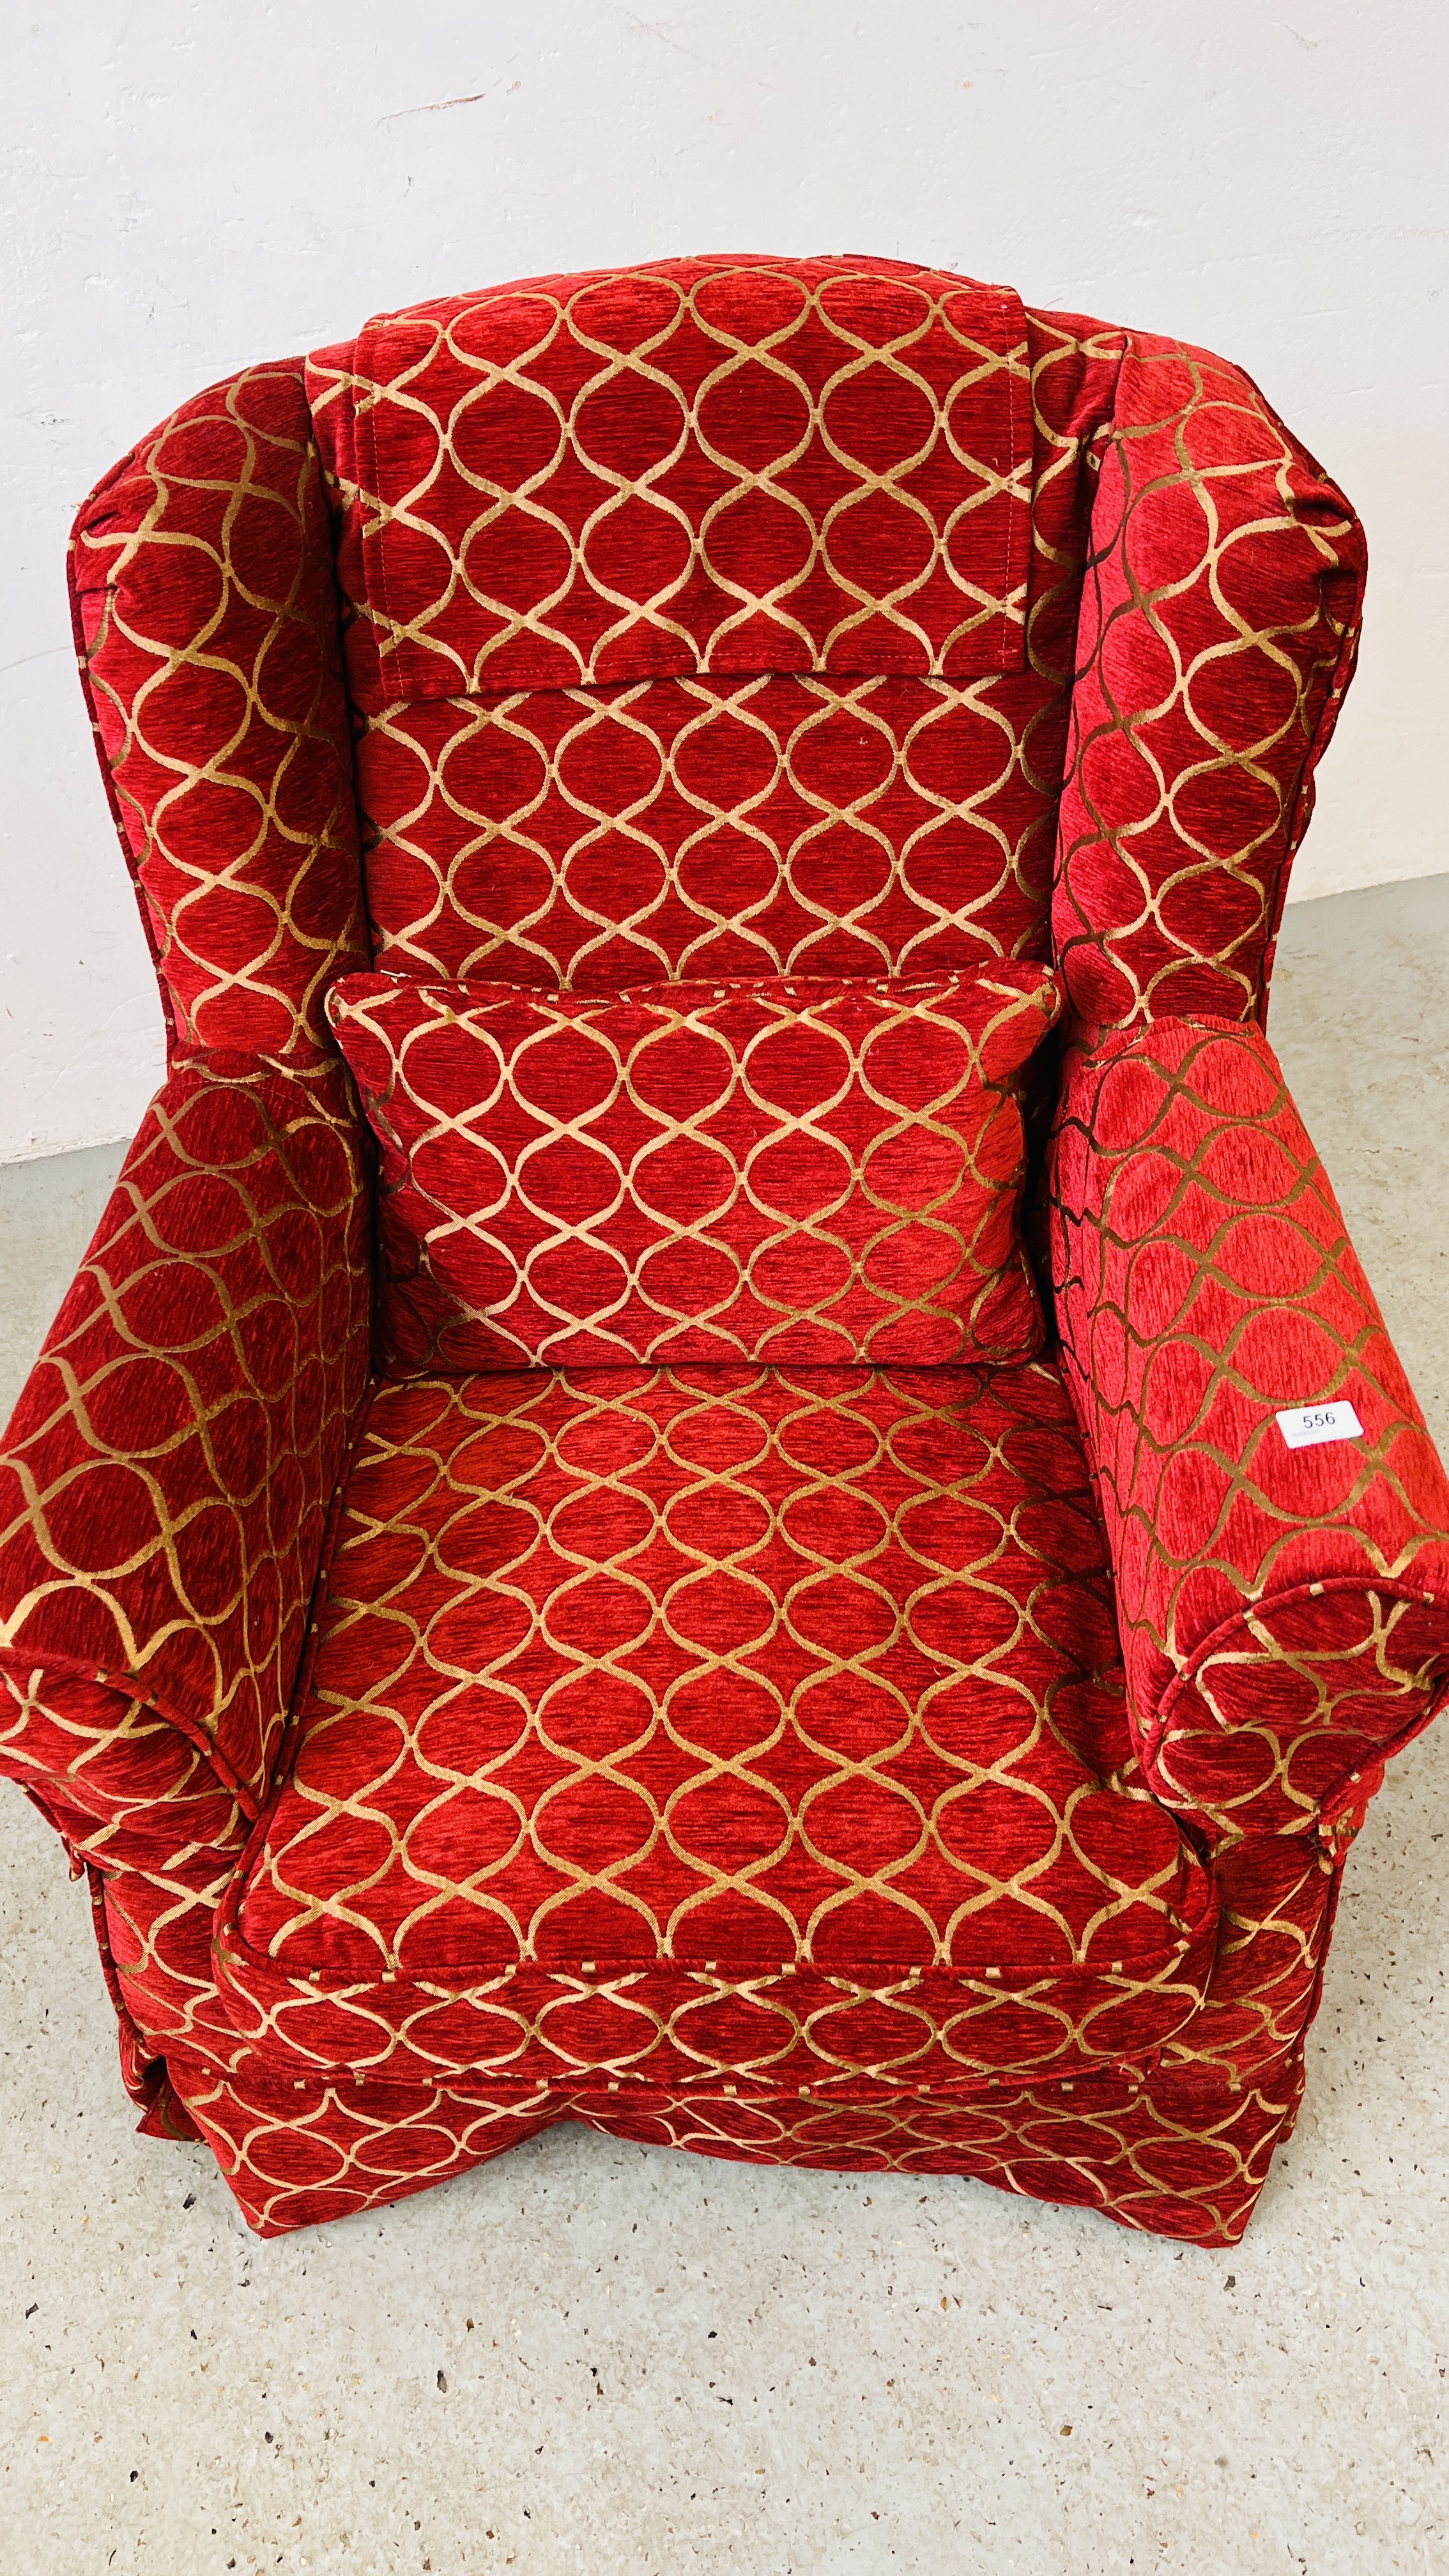 A MODERN WING BACK CHAIR UPHOLSTERED IN RED AND GOLD - Image 7 of 8